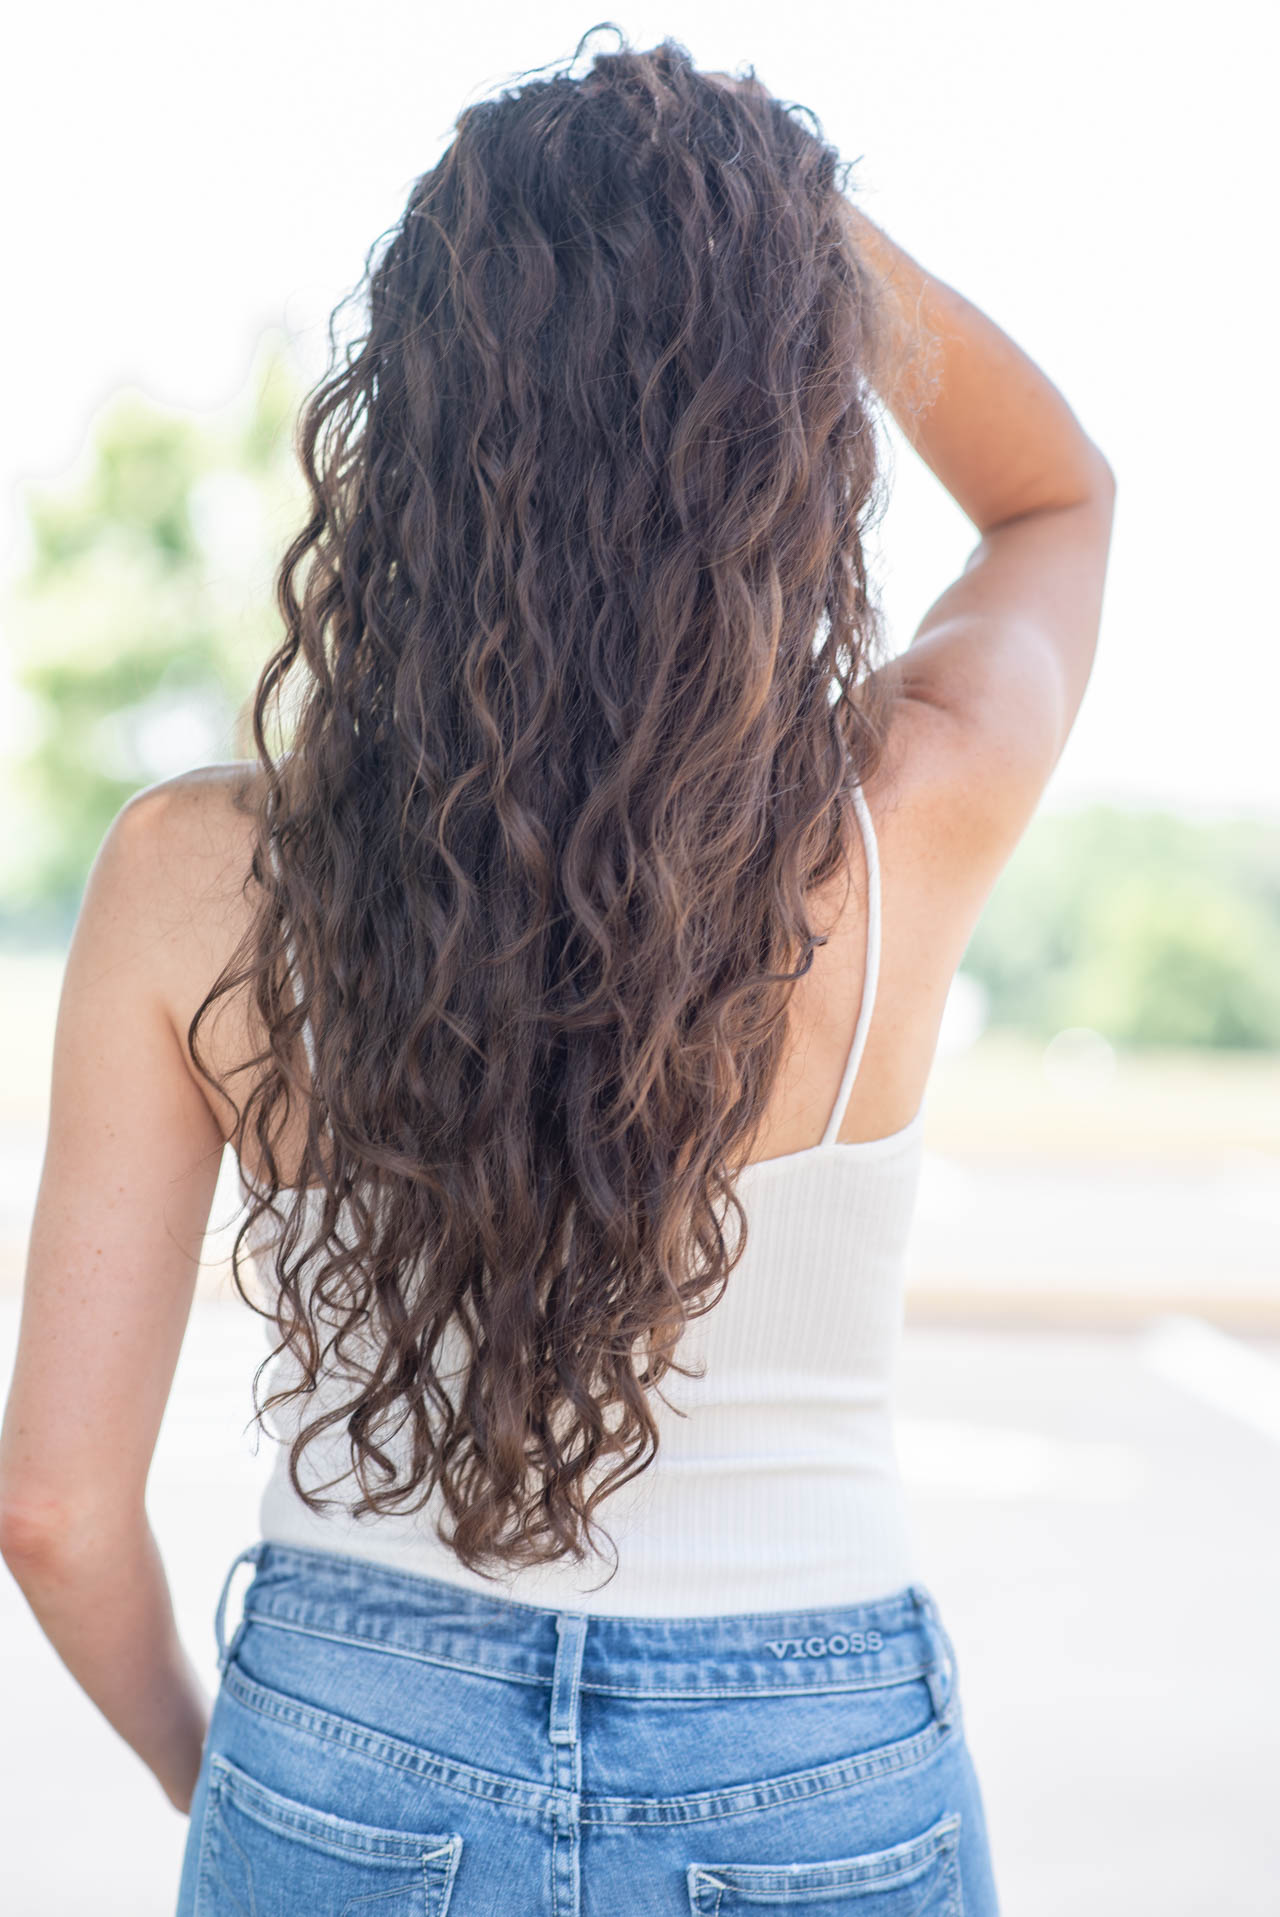 Learning to Love My Curly Hair, natural hair, curly hair, curly girl method, beauty blogger, hair products for curly hair, sulfate free, hair care, devacurl